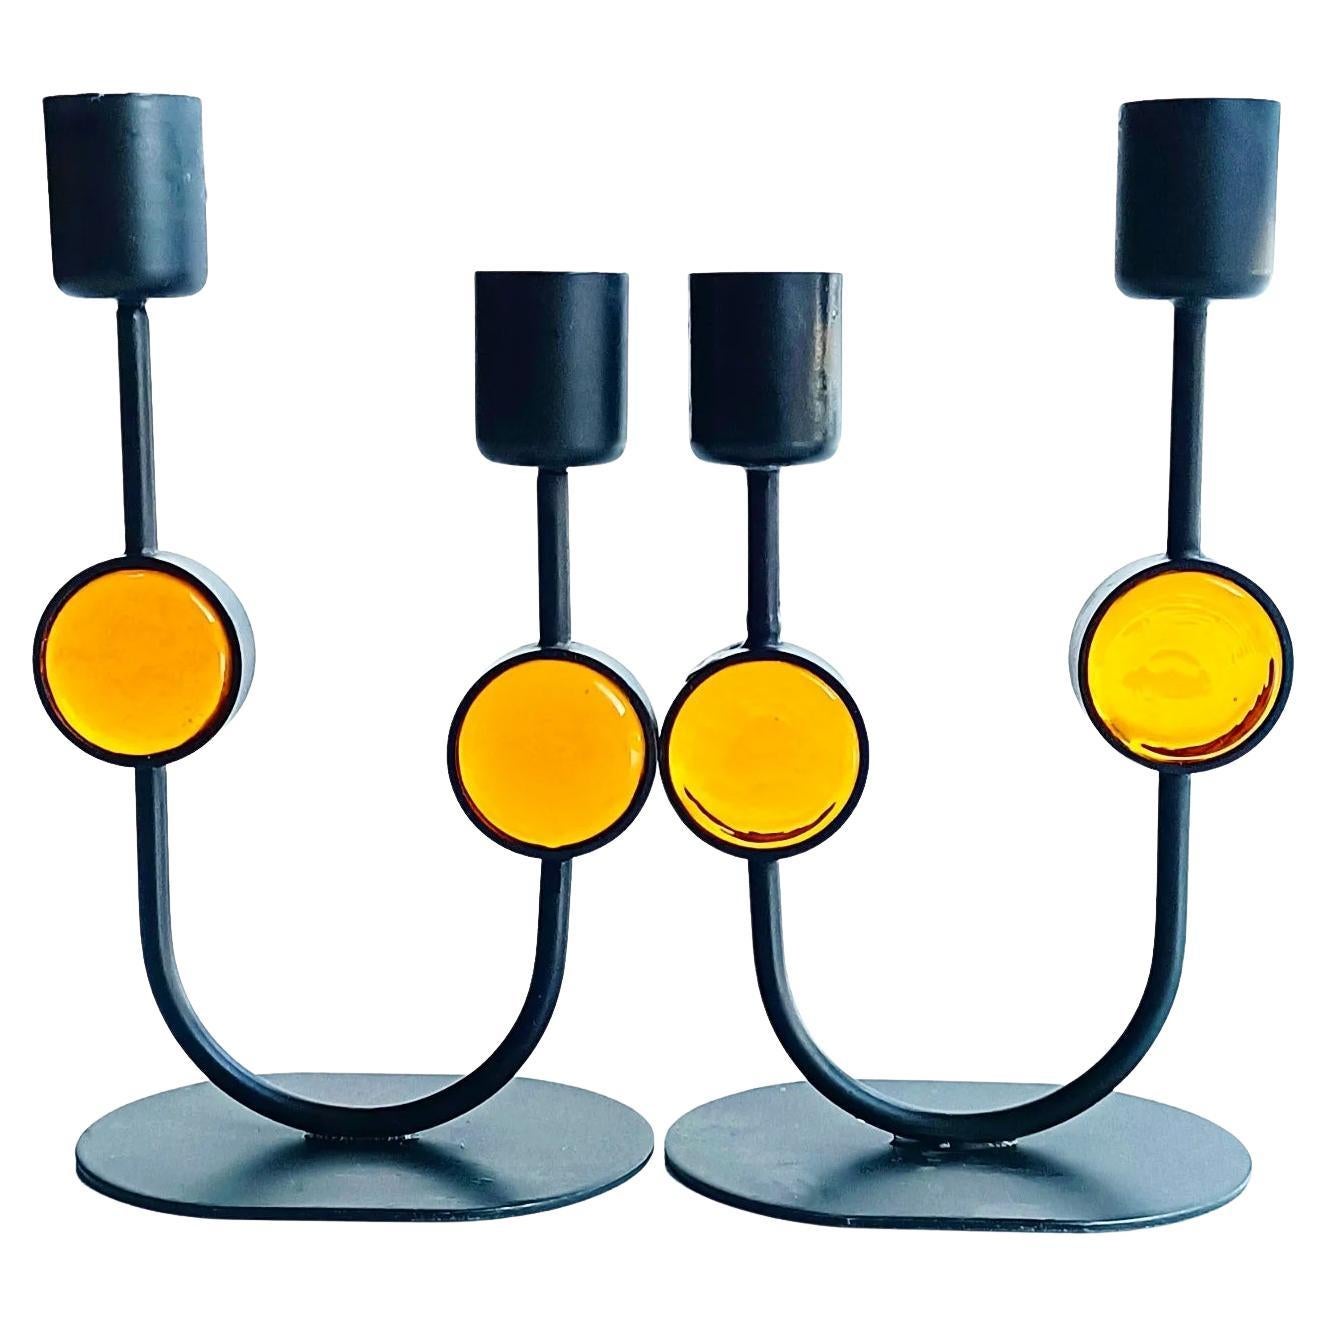 Beyond cool pair of candle holders designed by Gunnar Ander for Ystad-Metal. Handcrafted in Sweden during the 1950s, these candle holders are a testament to Ander's unparalleled creativity and craftsmanship.

Made from durable metal and vibrant